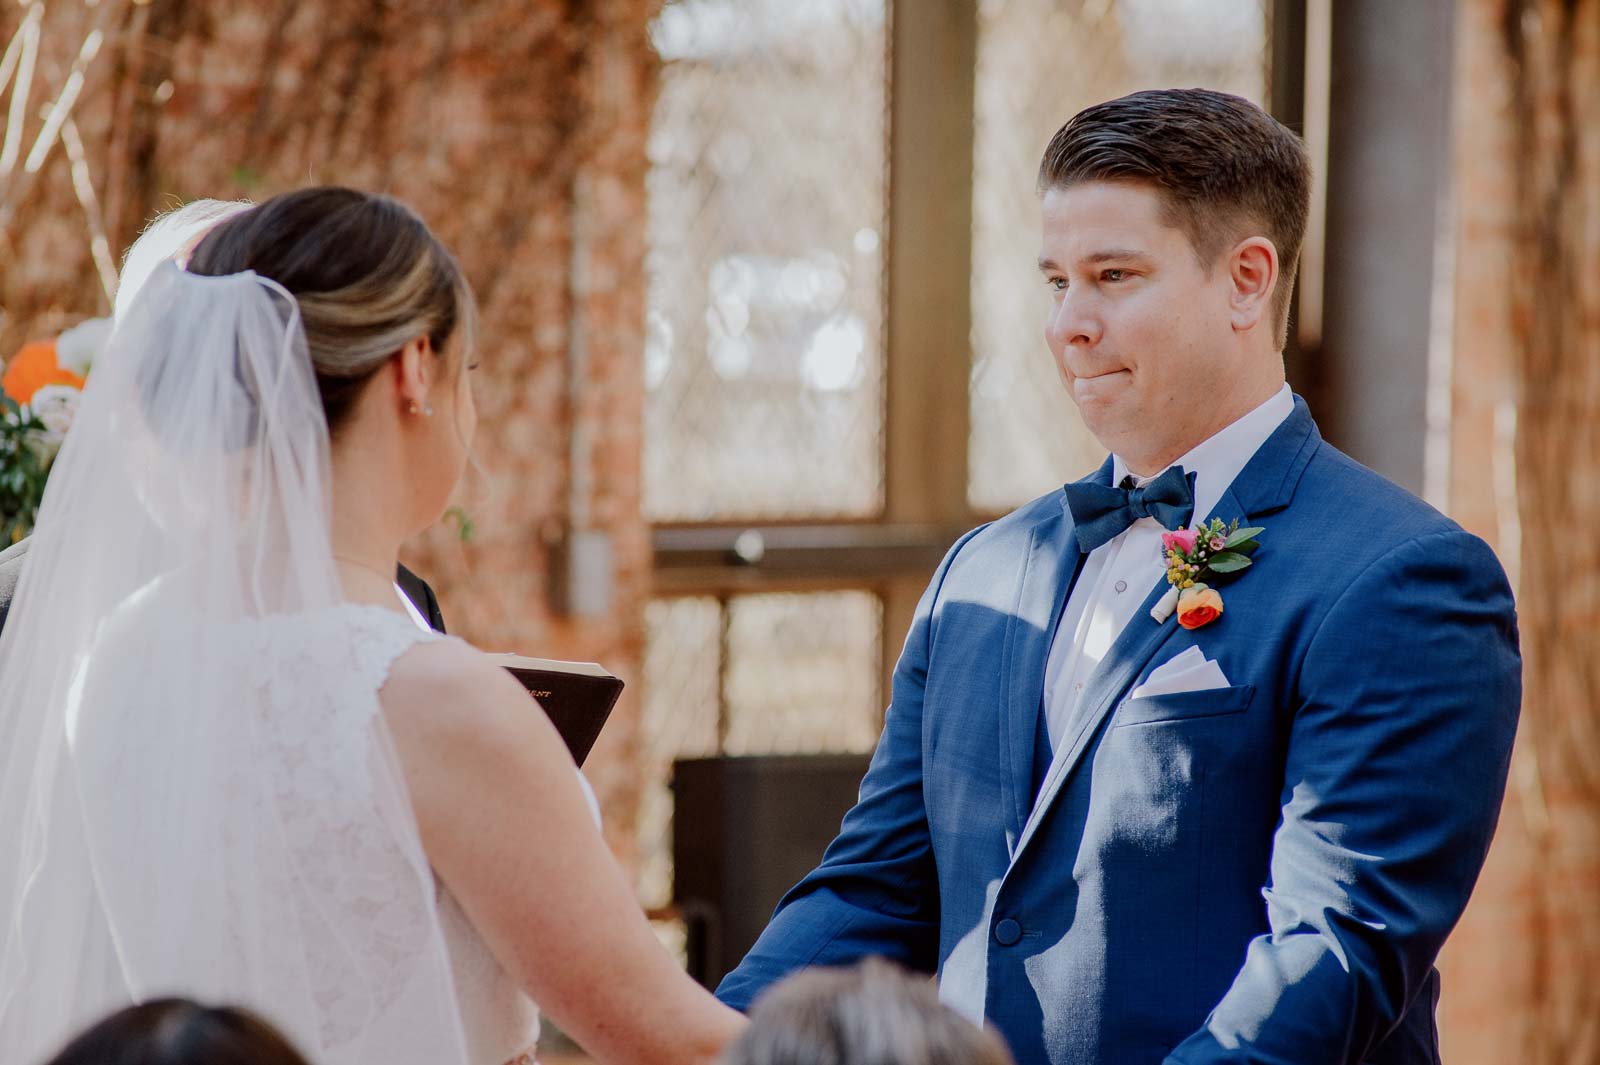 As a couple recite the vowels the groom gets emotional as he looks at his bride